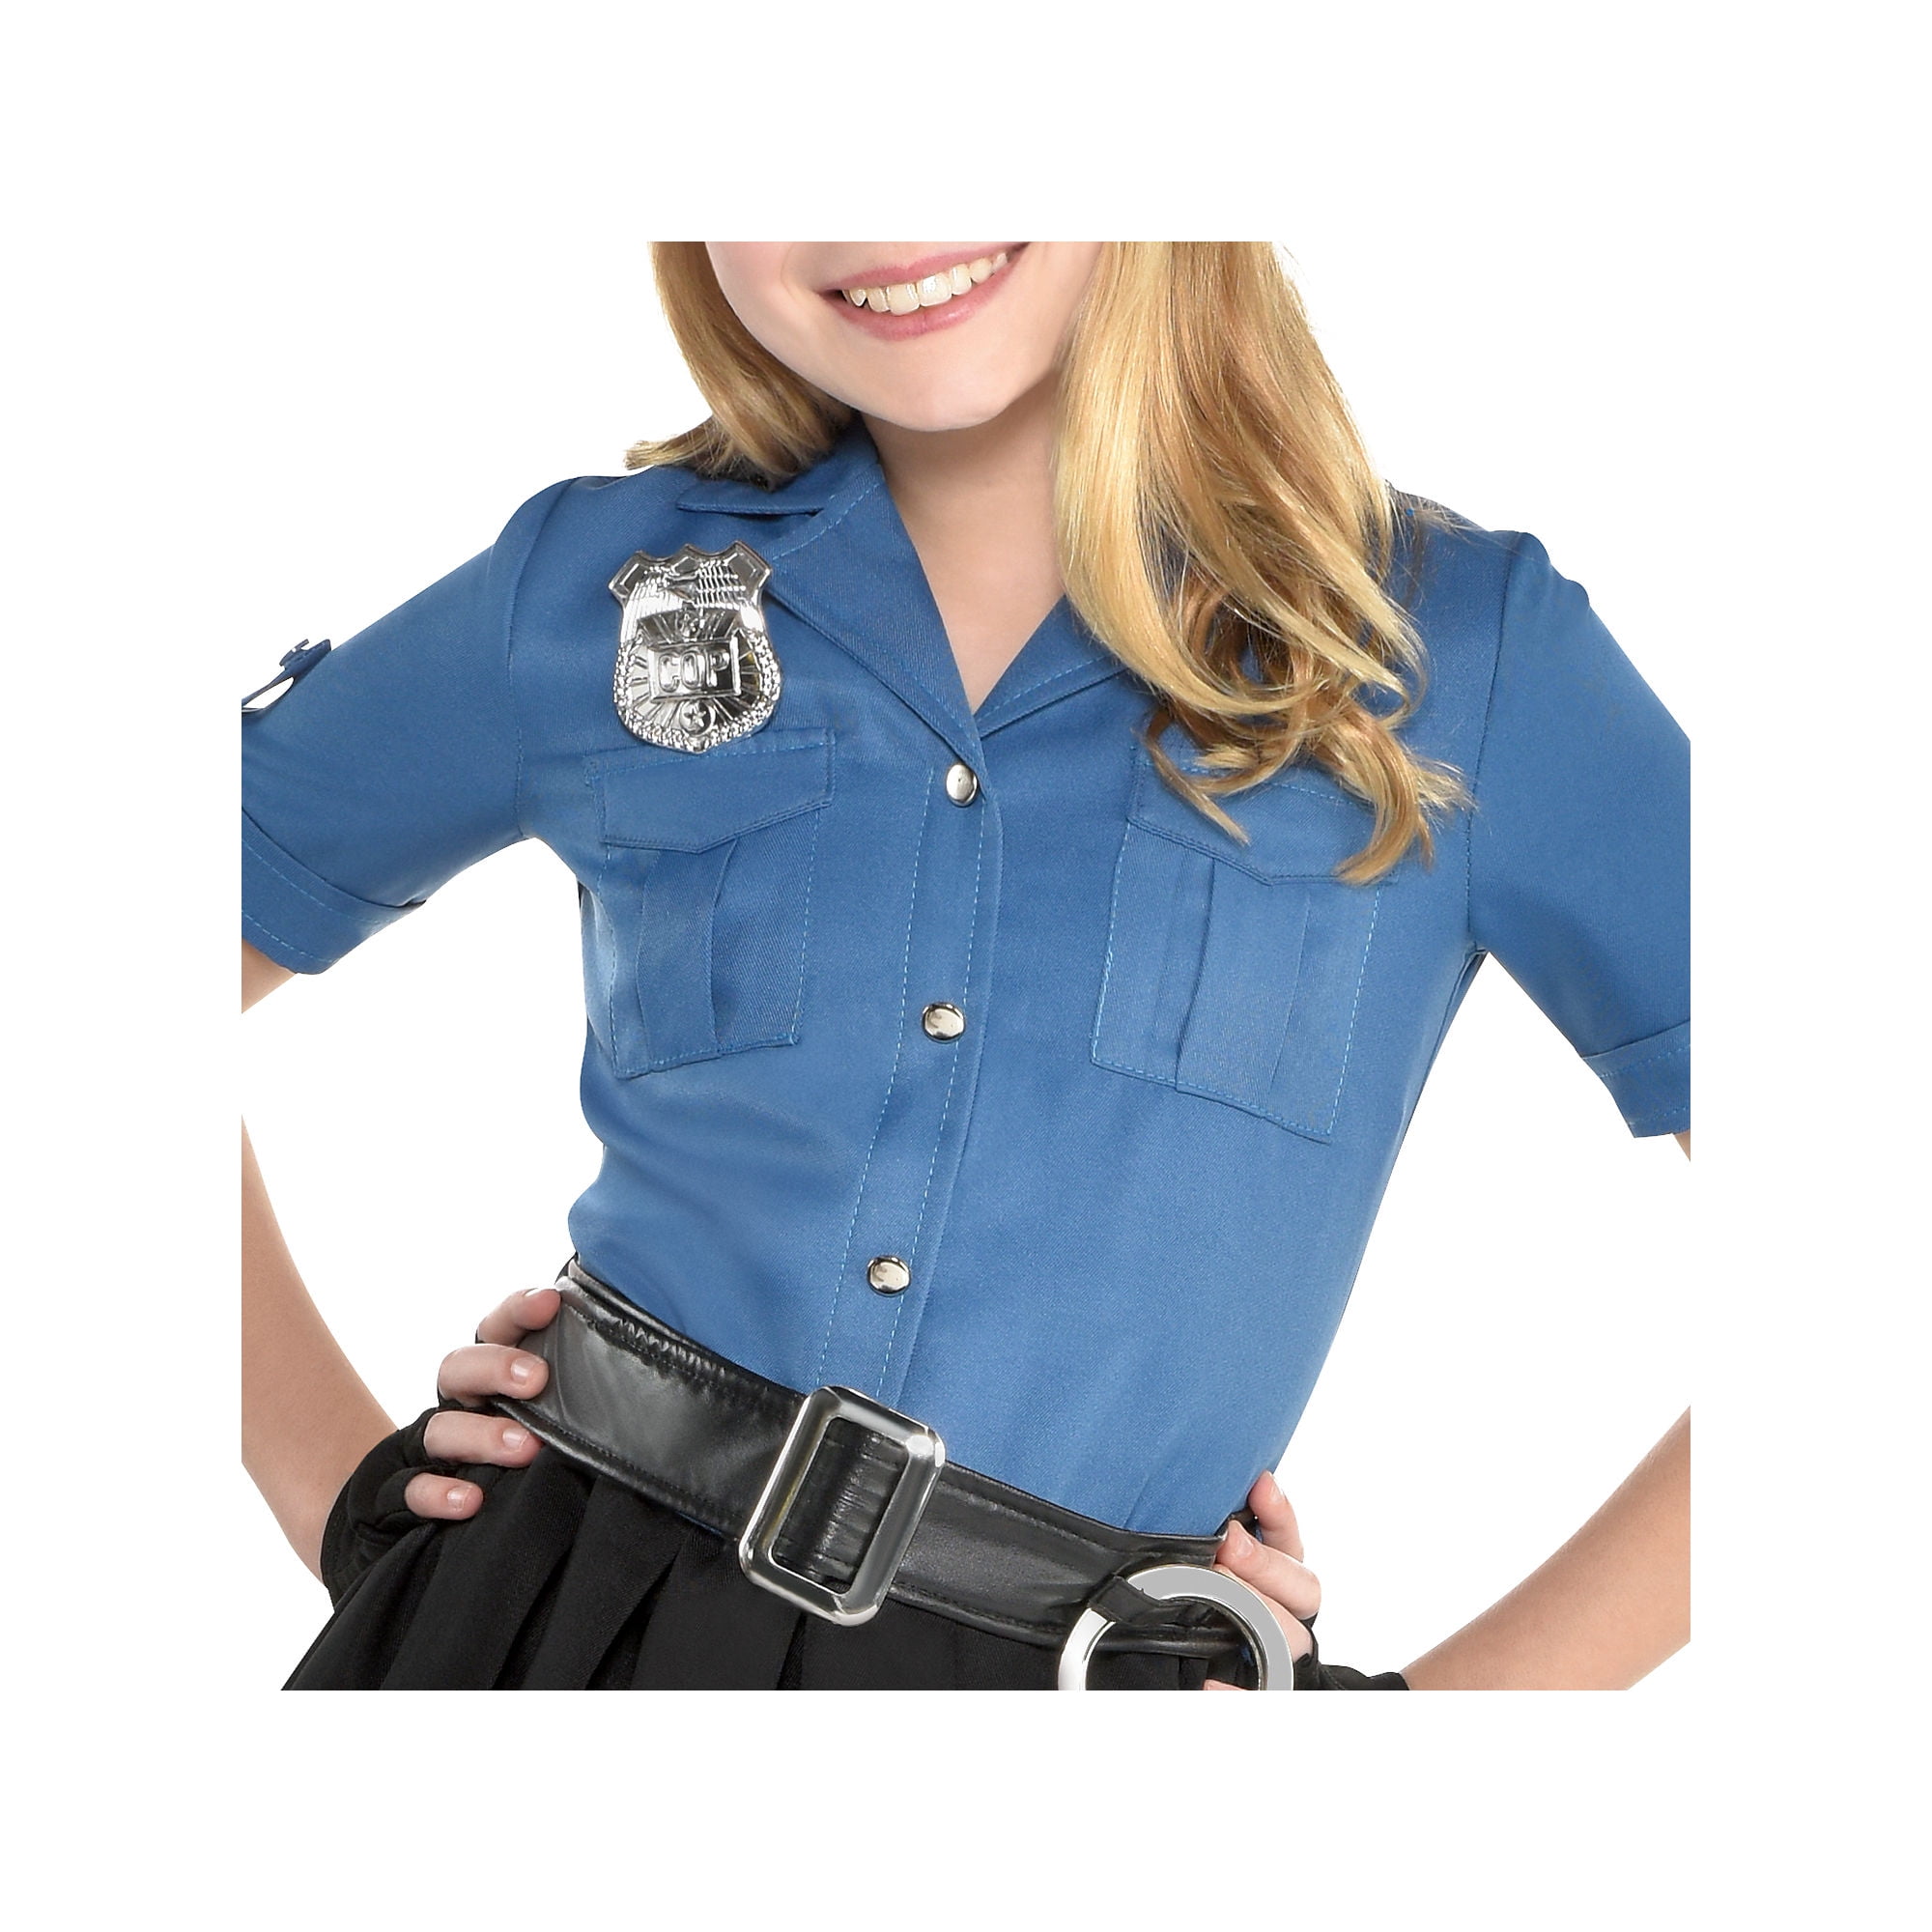 Suit yourself costume co., Costumes, Cop Cutie Police Officer Girl  Halloween Costume Girls Size L 214